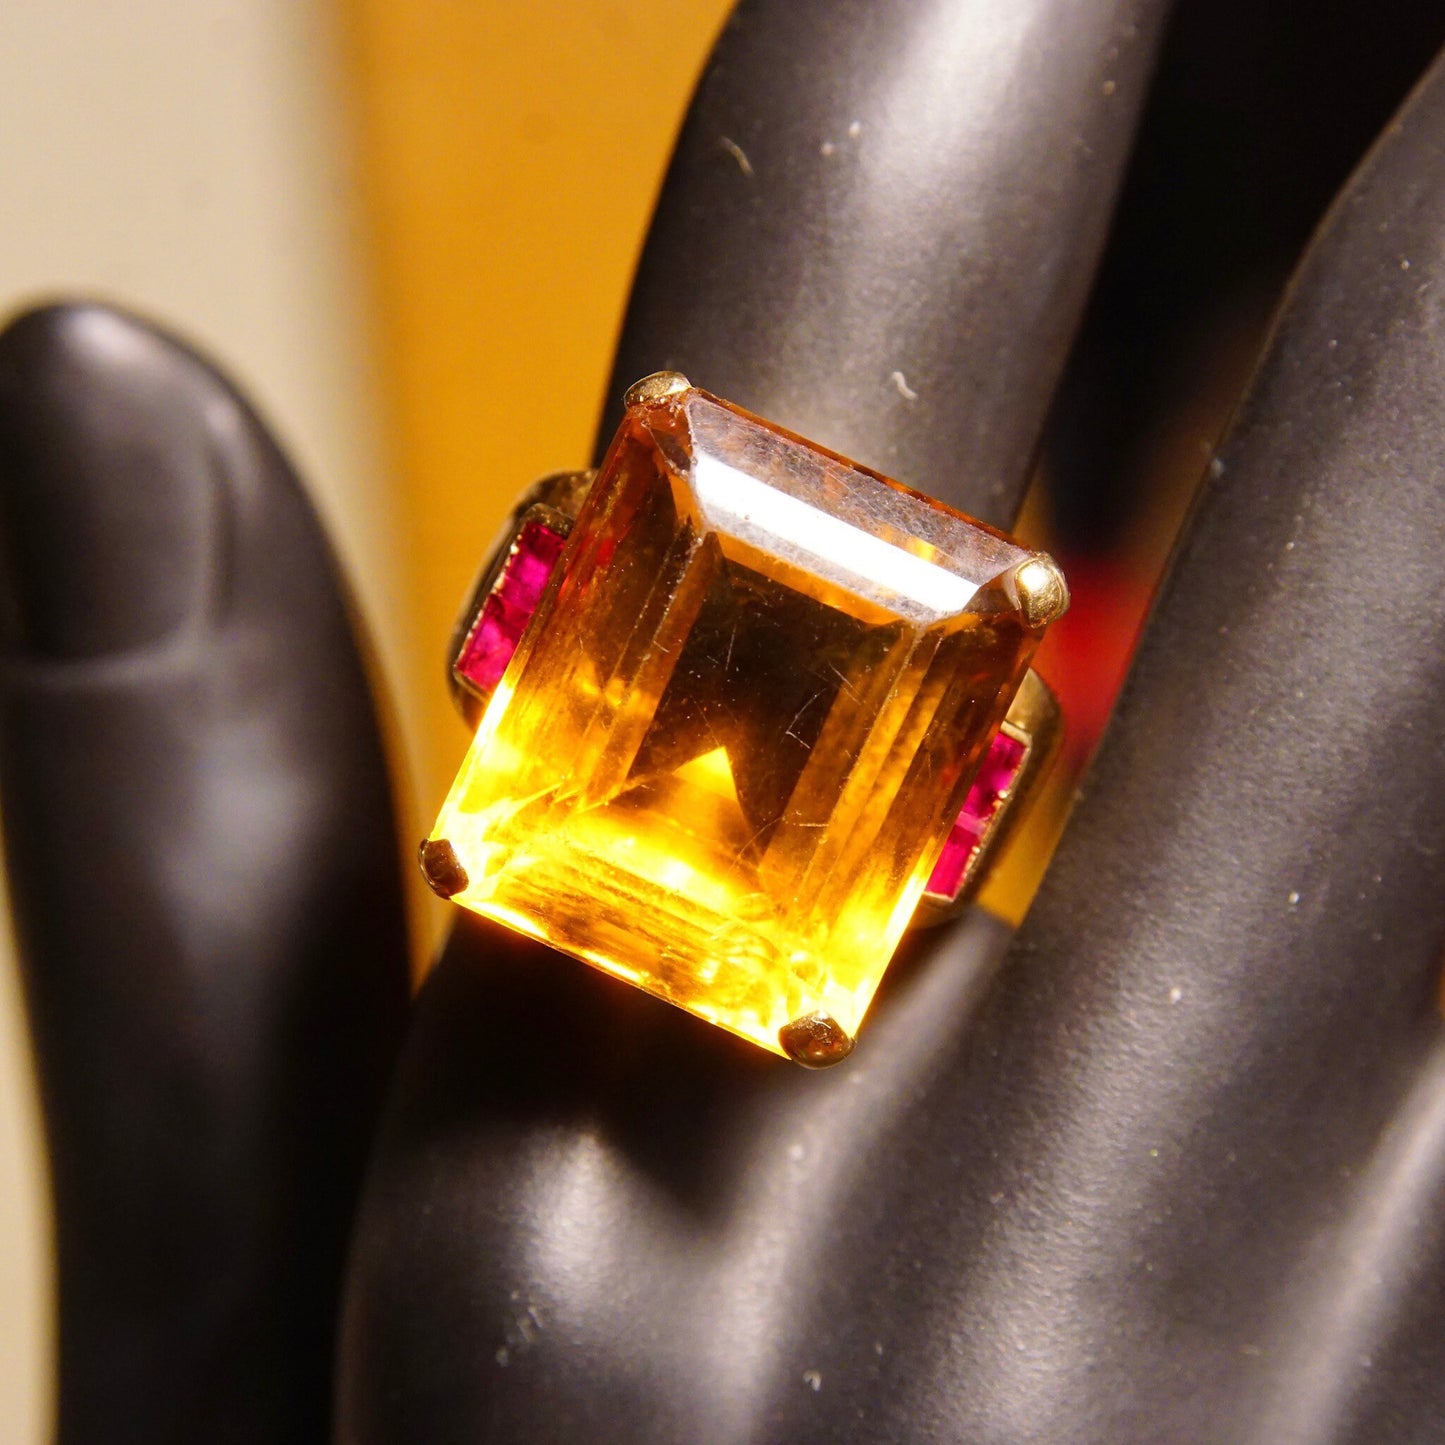 Striking 14K yellow gold estate cocktail ring featuring a large emerald-cut citrine gemstone accented with rubies on a black mannequin hand display.